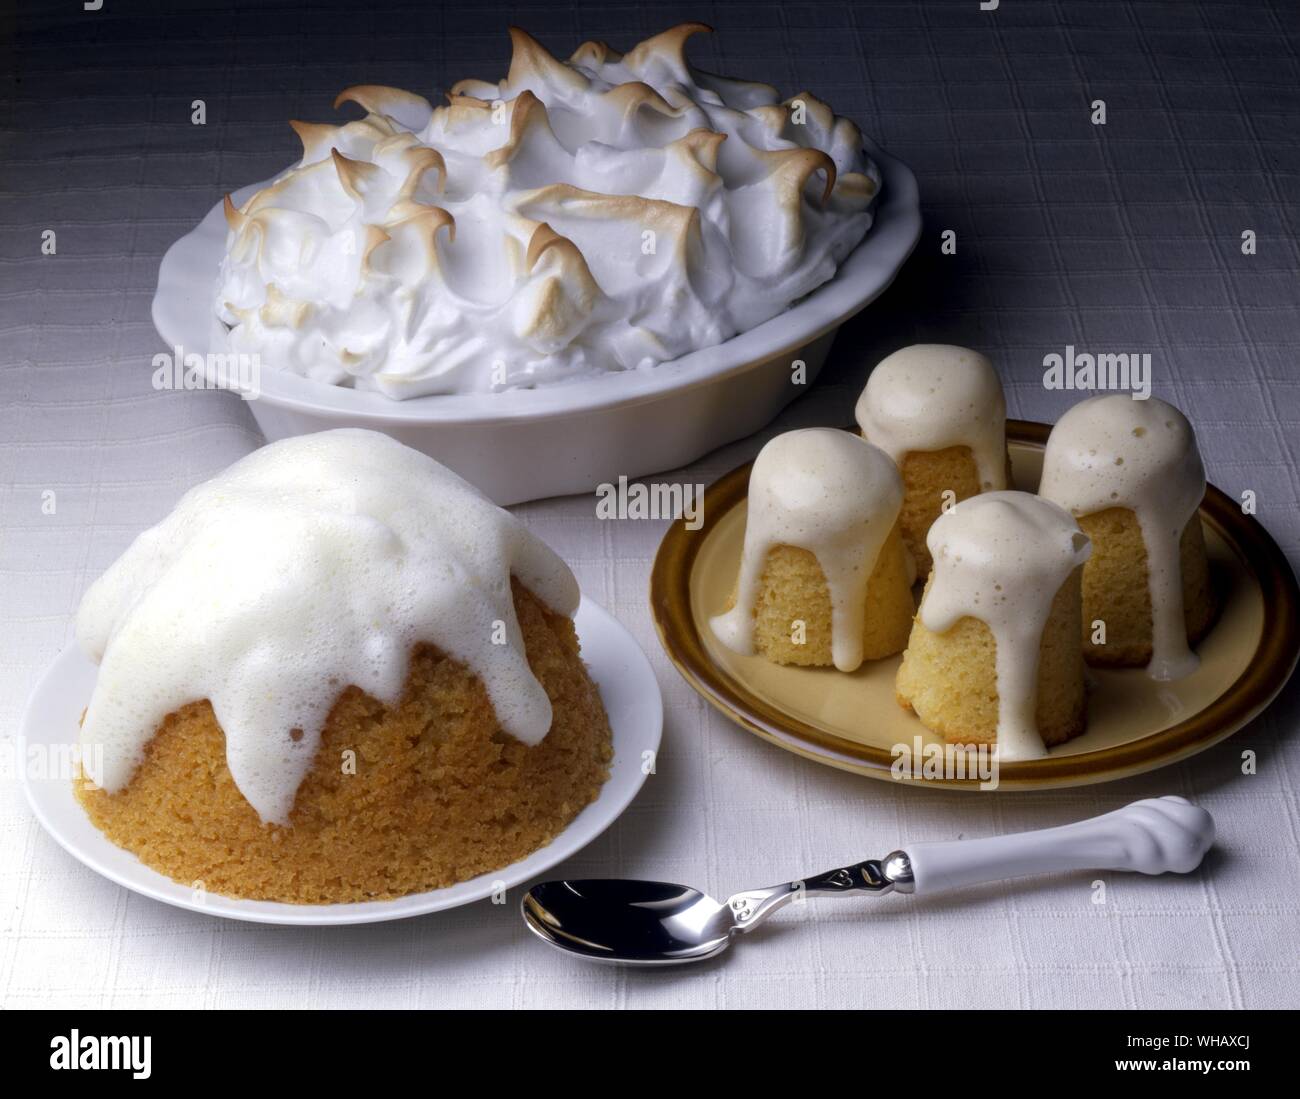 Queen of Puddings. Canary Pudding with Lemon Sauce. Castle Puddings Stock Photo